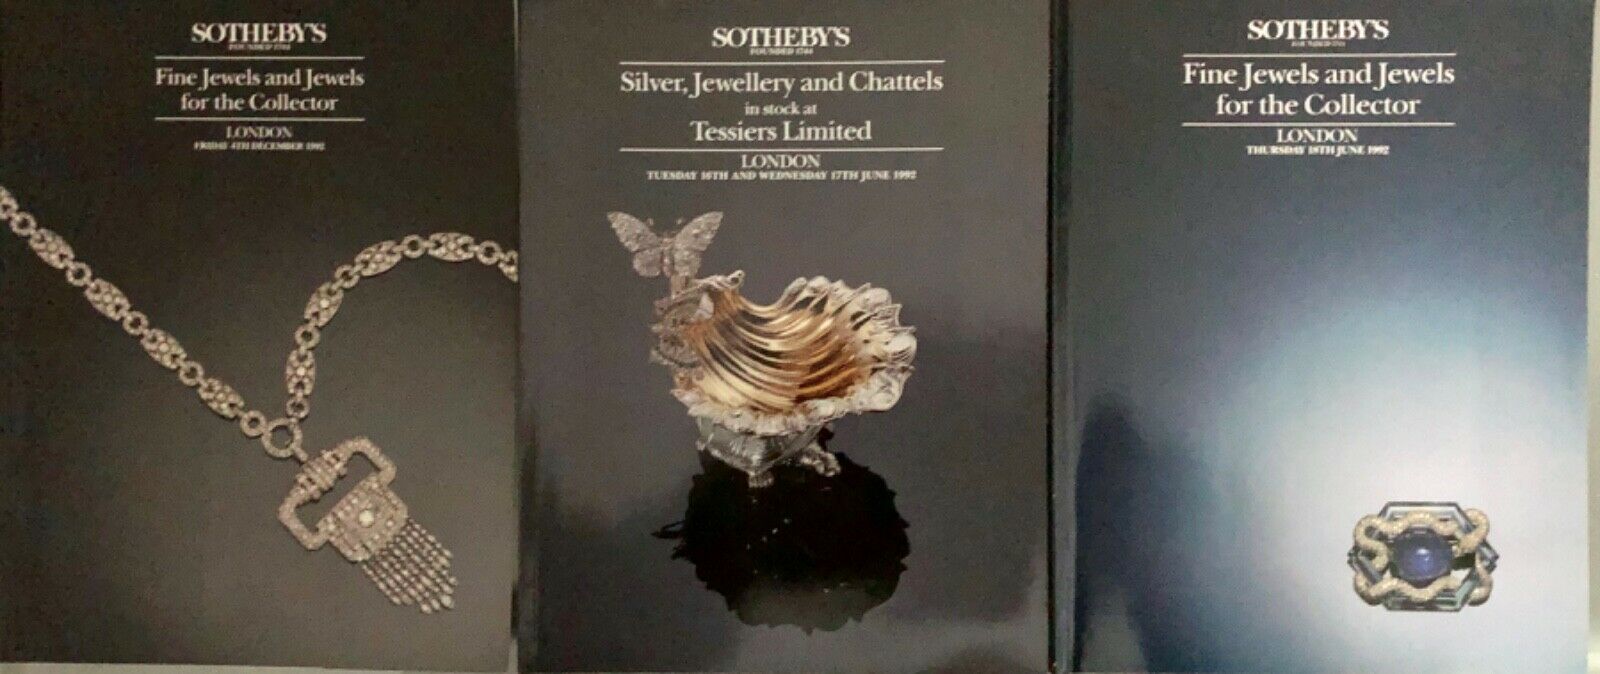 Sotheby’s Fine Jewels Catalogue ‘92